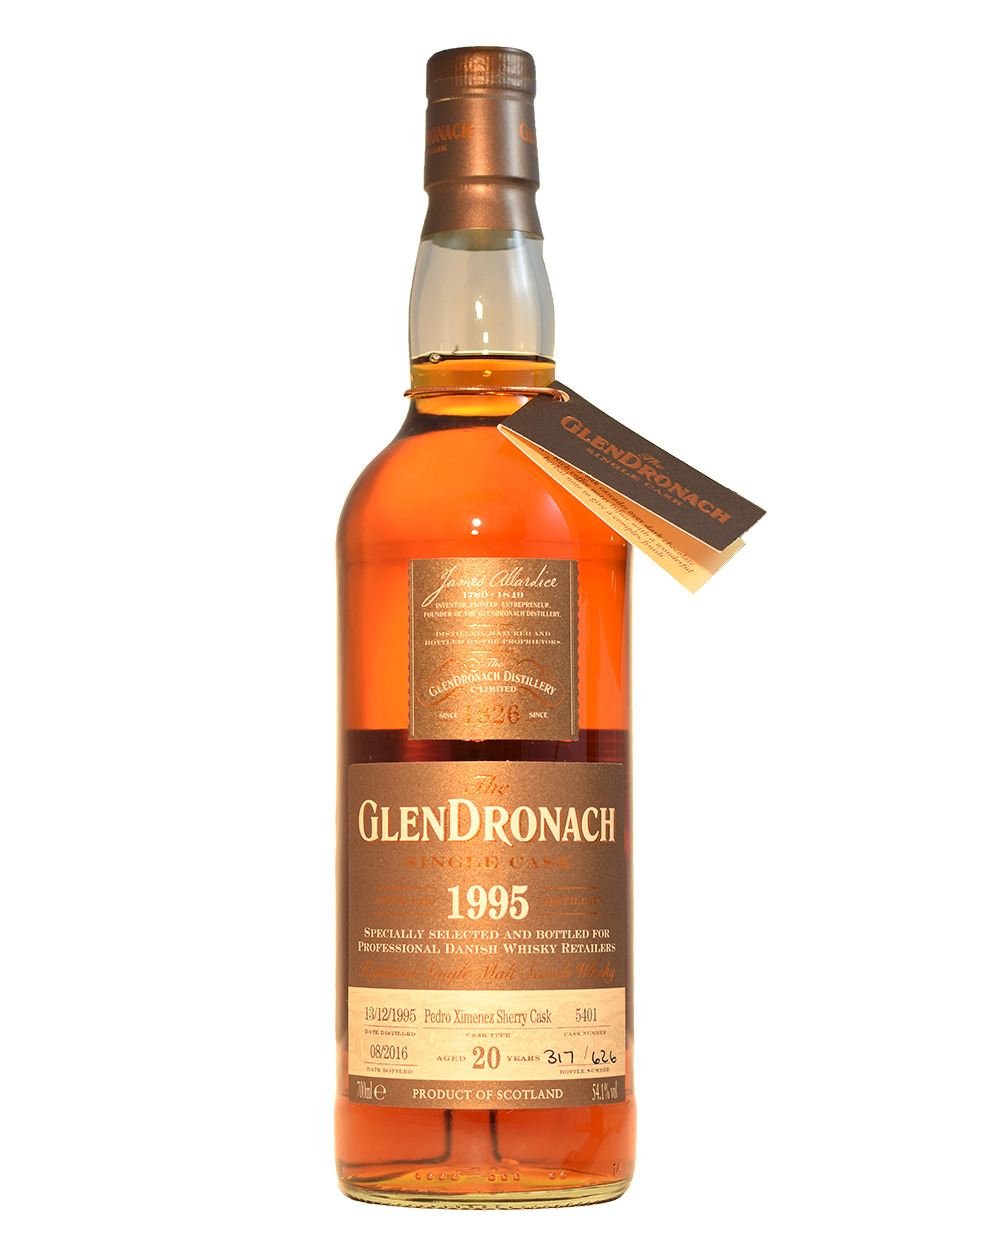 Glendronach 1995 Single Cask #5401 (20 Years Old) Musthave Malts MHM